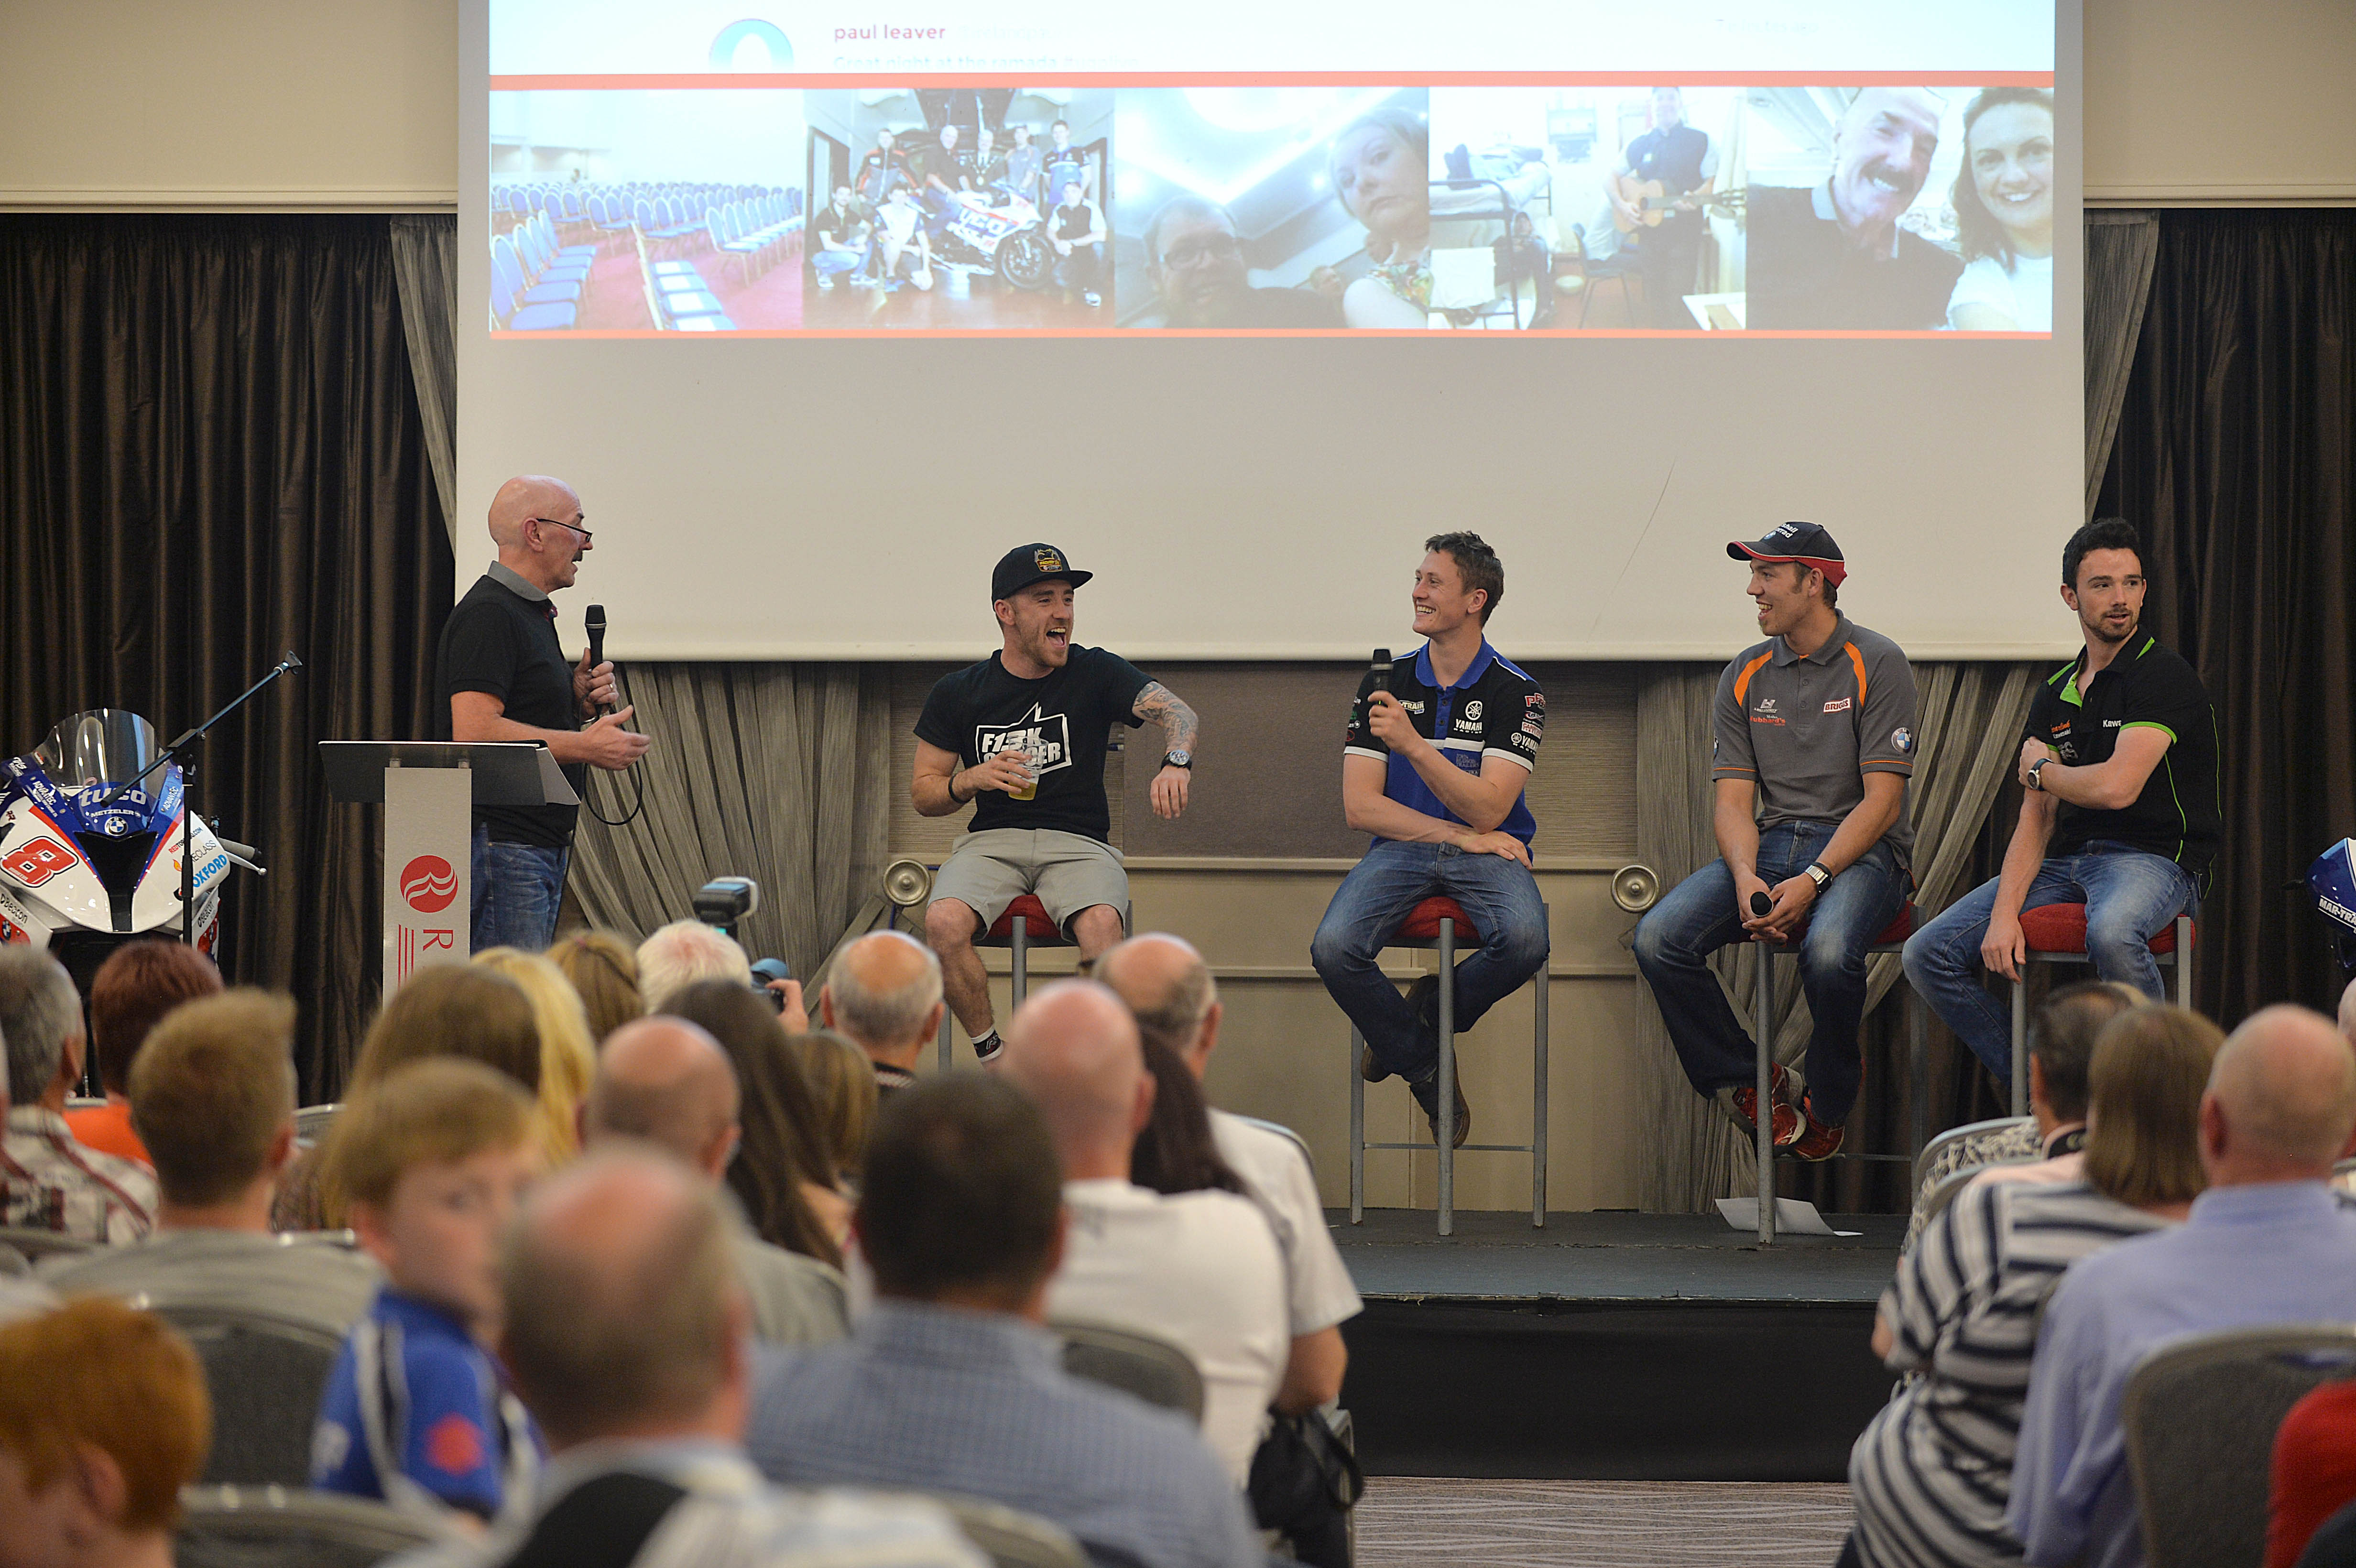 Meet the world’s fastest road racers at free event for MCE UGP fans